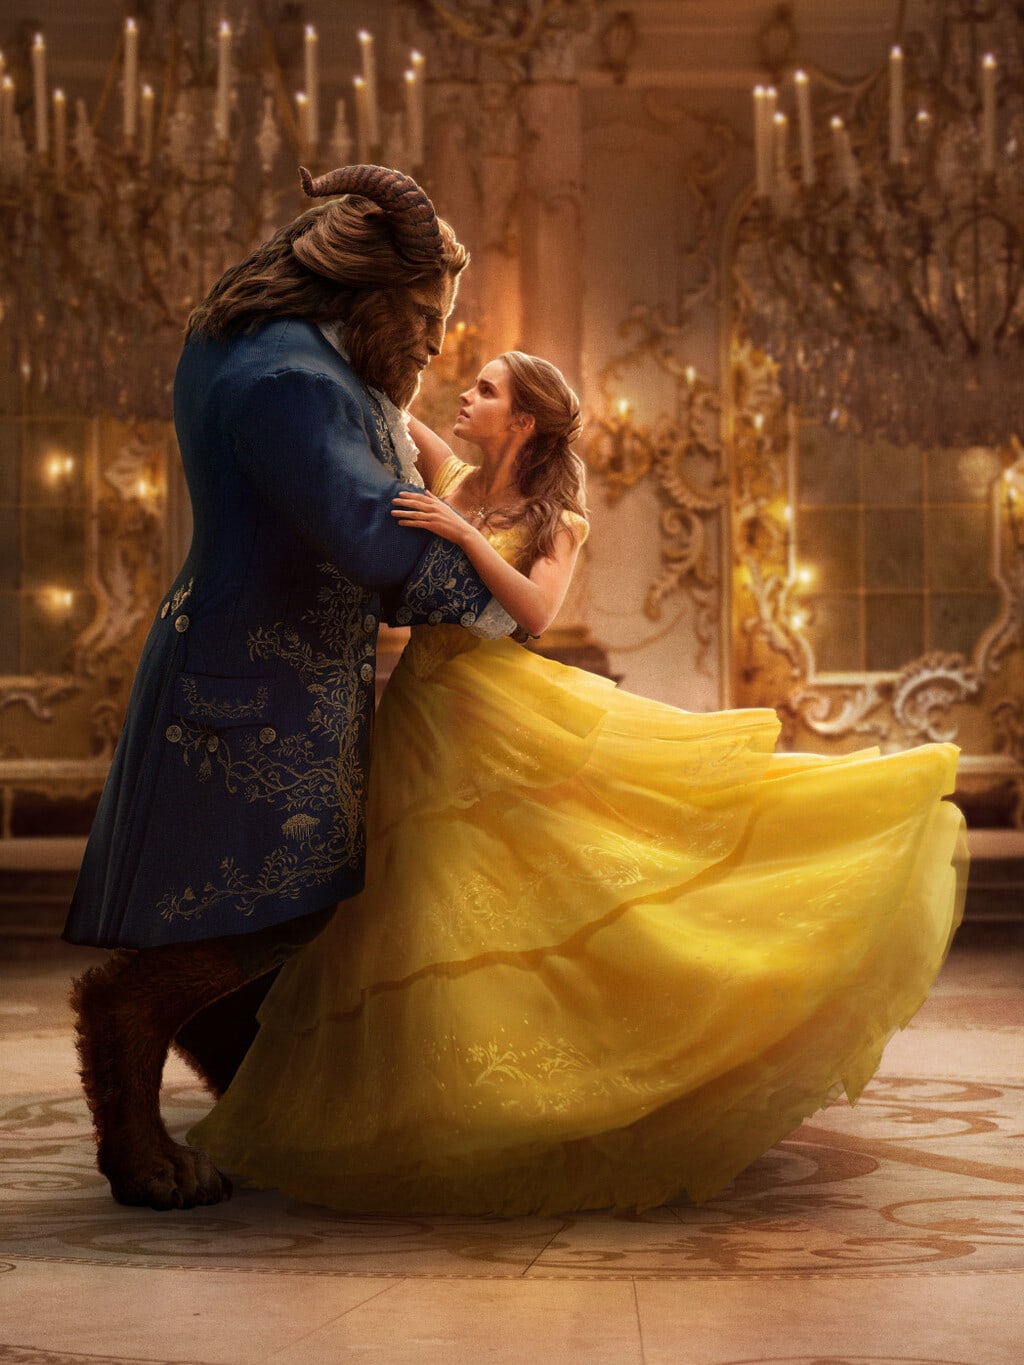 New Beauty and The Beast Images